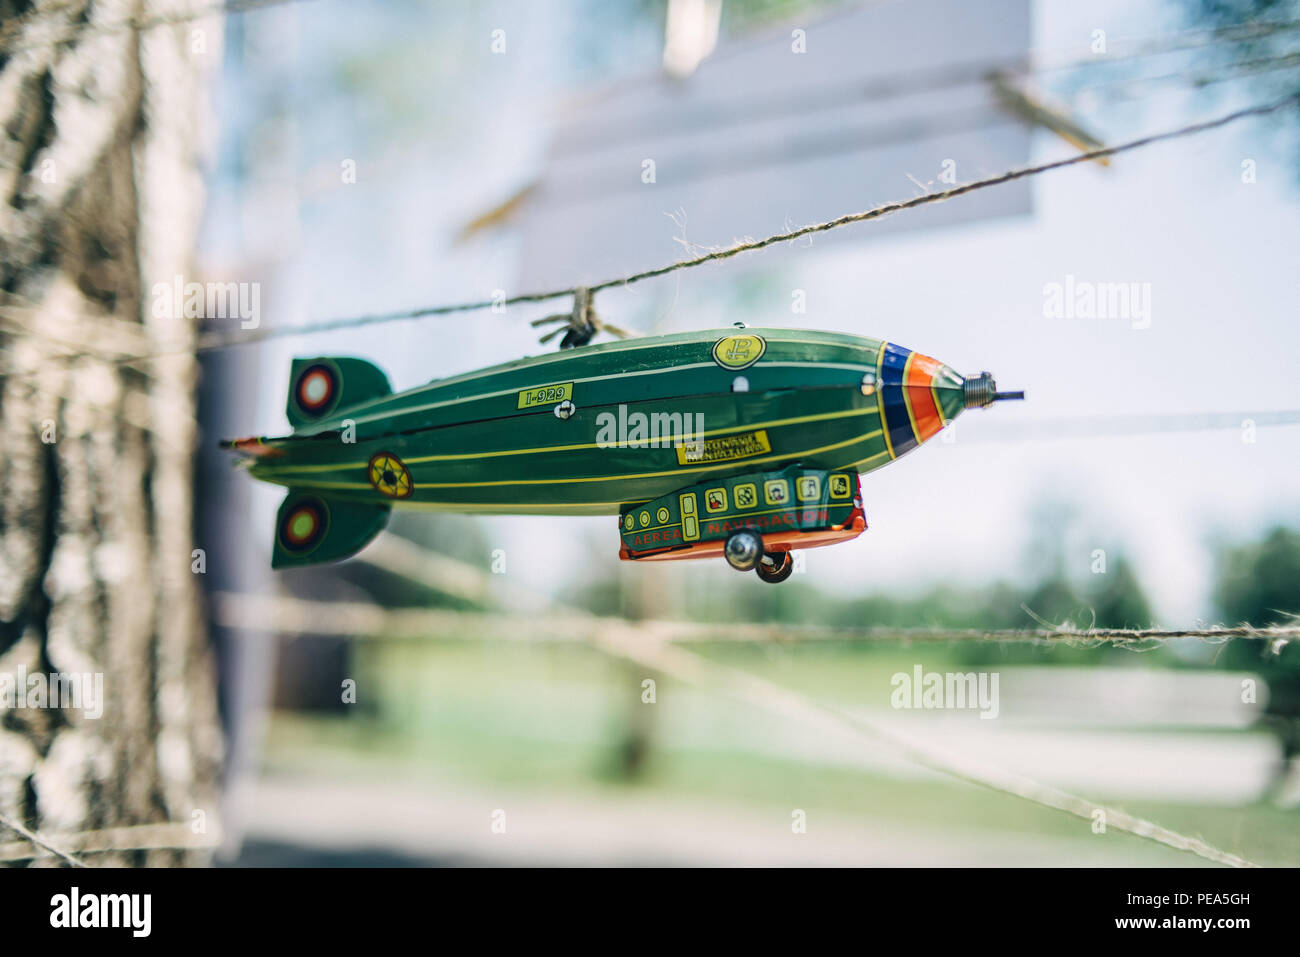 A toy airship hangs on a string Stock Photo